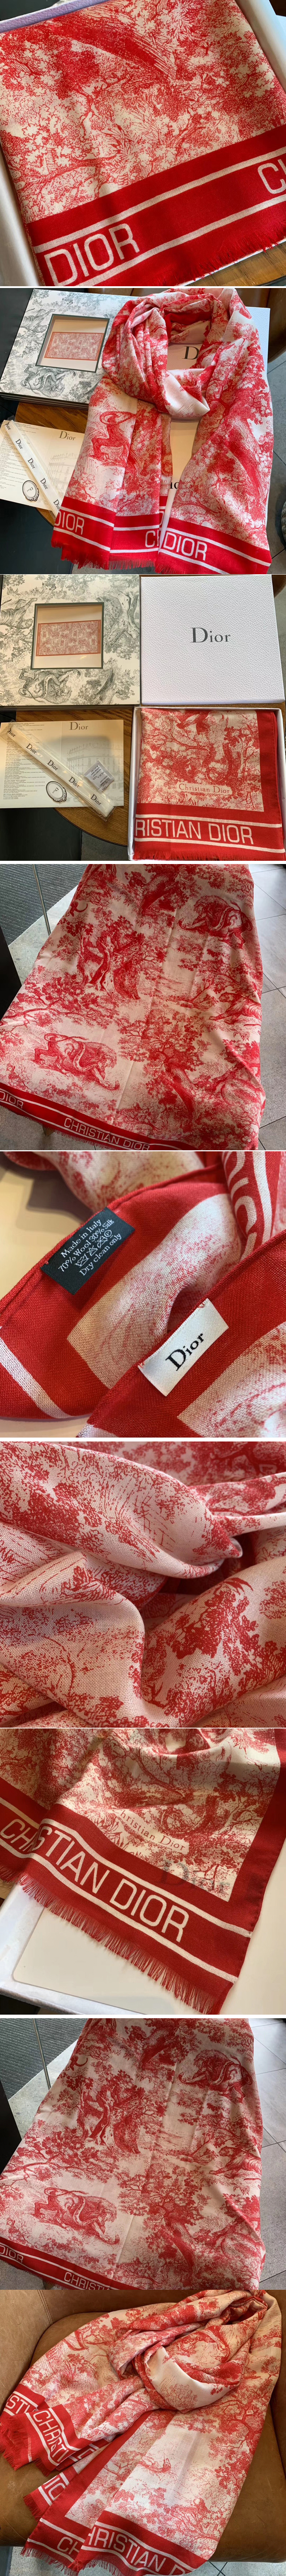 Replica Dior Scarves And Shawls